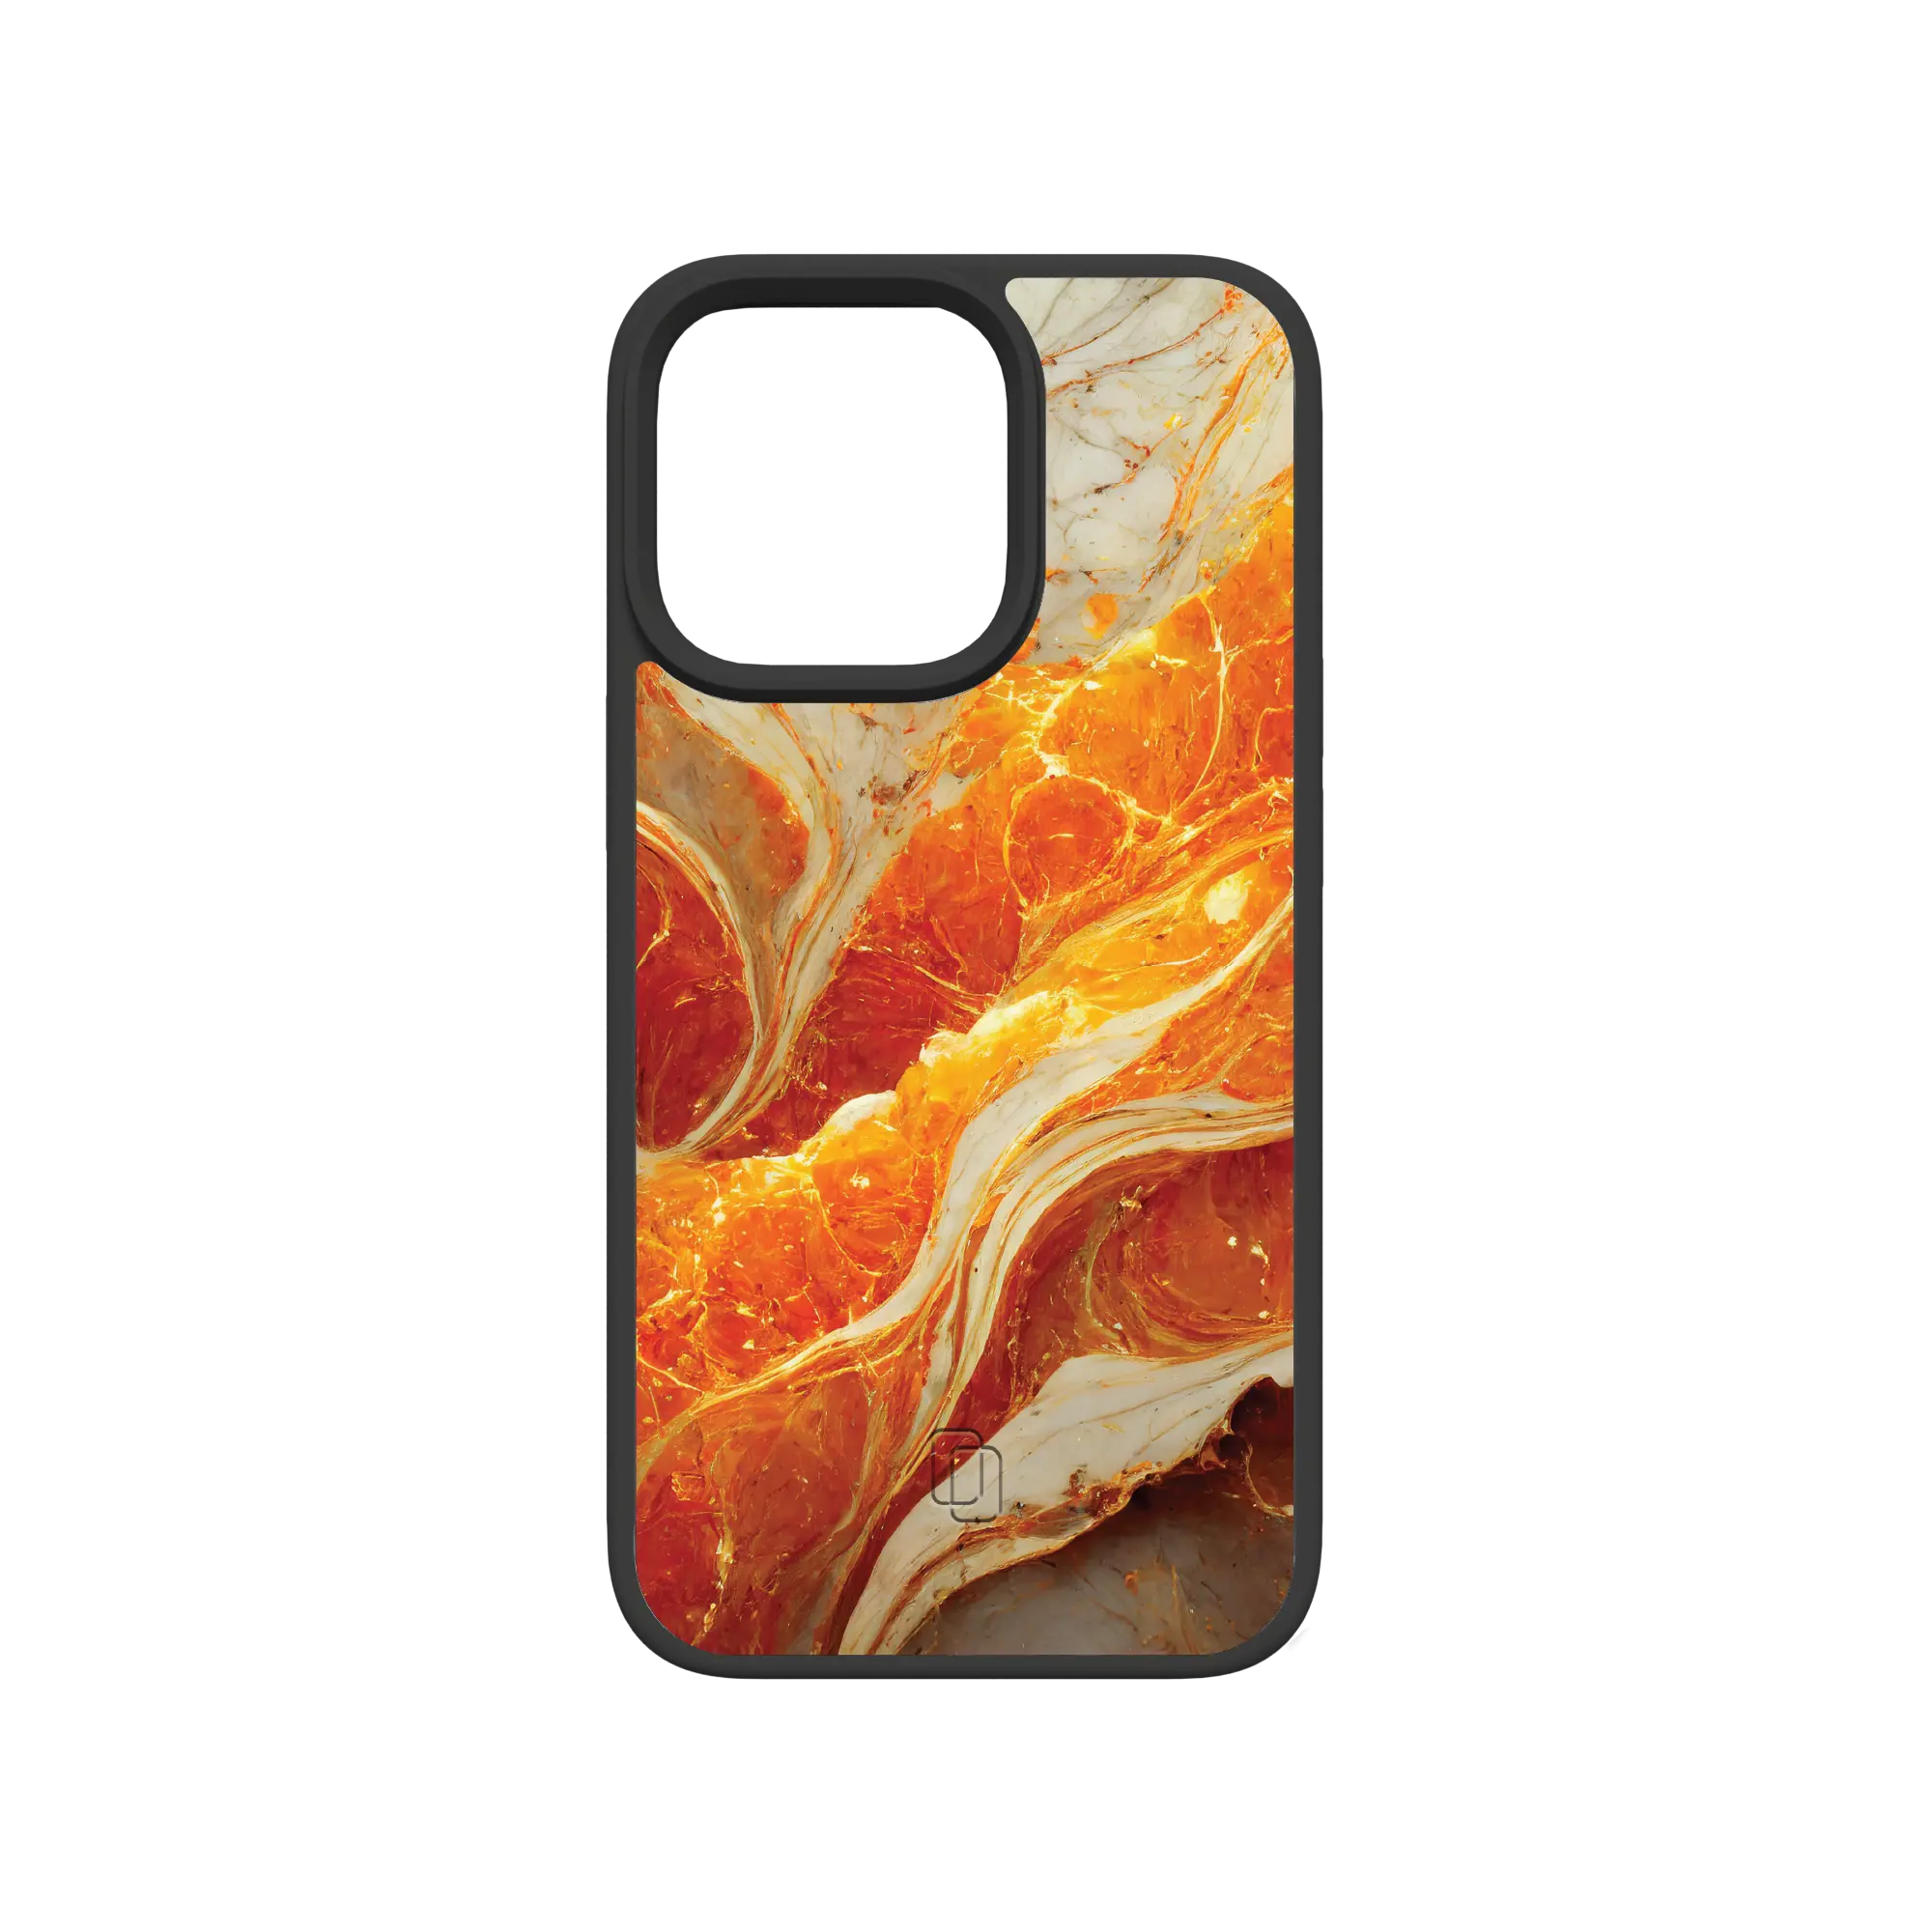 Apple-iPhone-13-Pro-Crystal-Clear Golden Sunrise | Protective MagSafe Case | Marble Stone Collection for Apple iPhone 13 Series cellhelmet cellhelmet